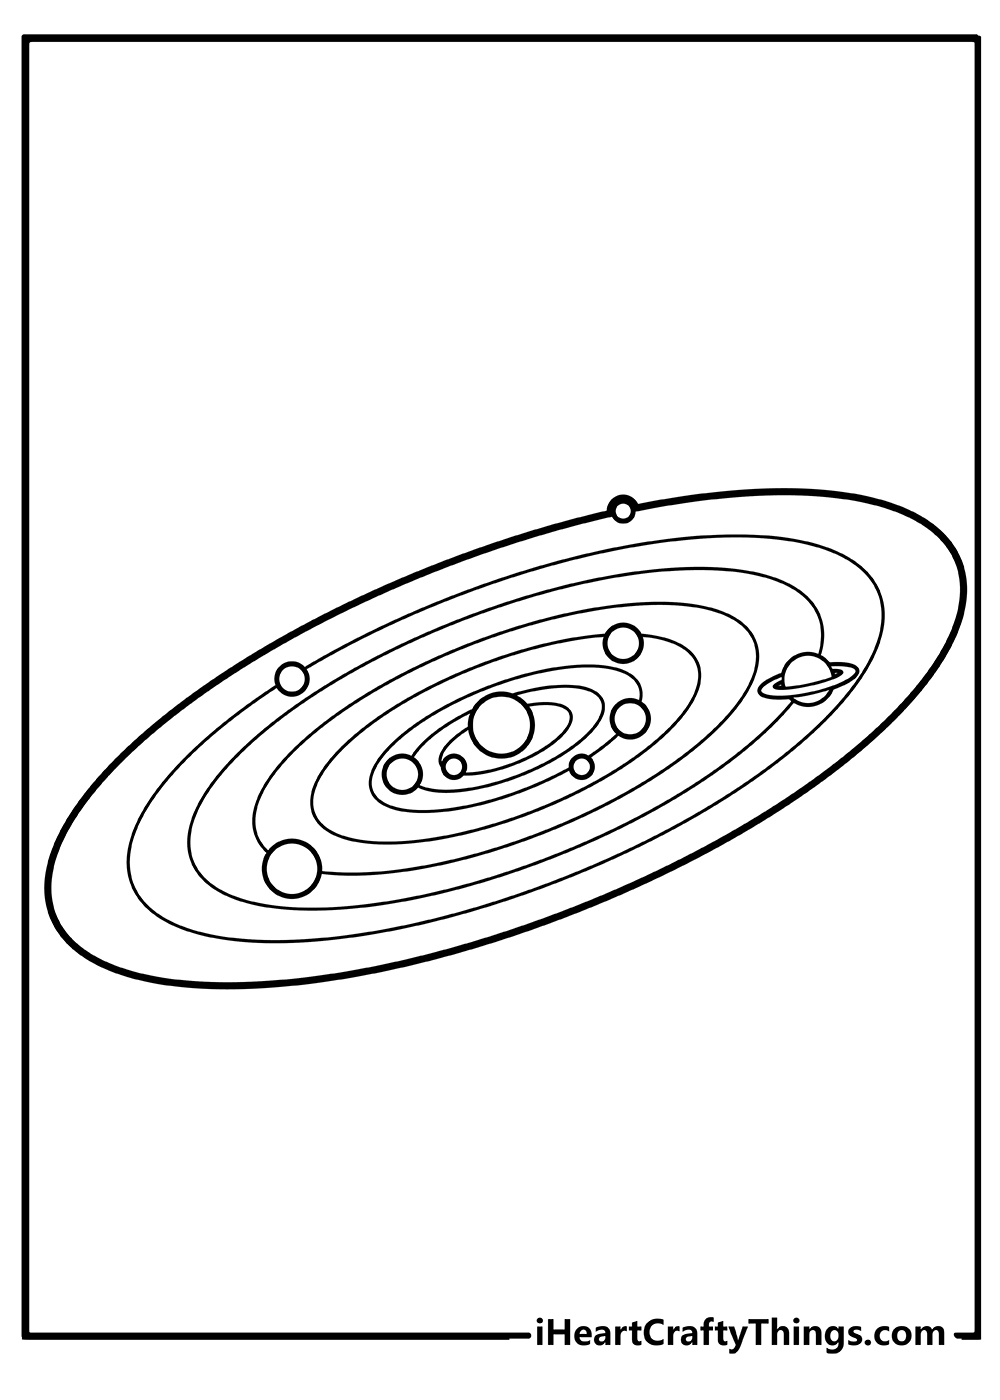 Solar System Coloring Book for kids free printable